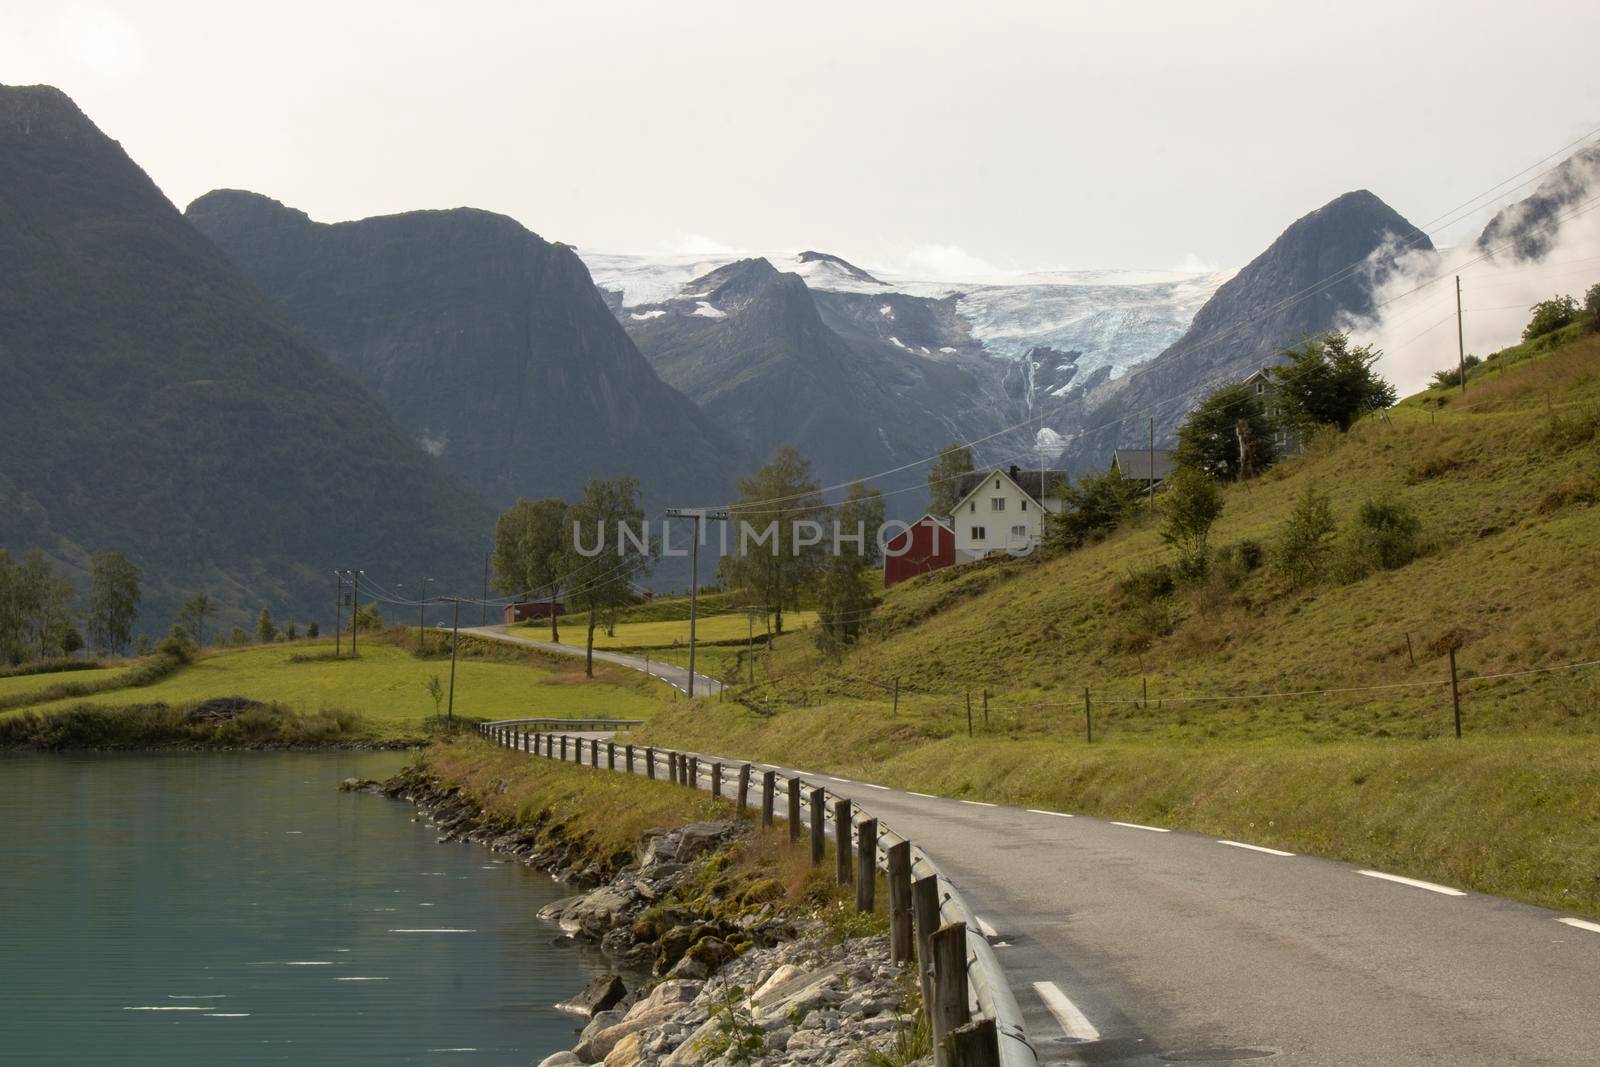 Beautiful landscape showing a road next to a fjord and a house and some snowy mountains in the background in Norway